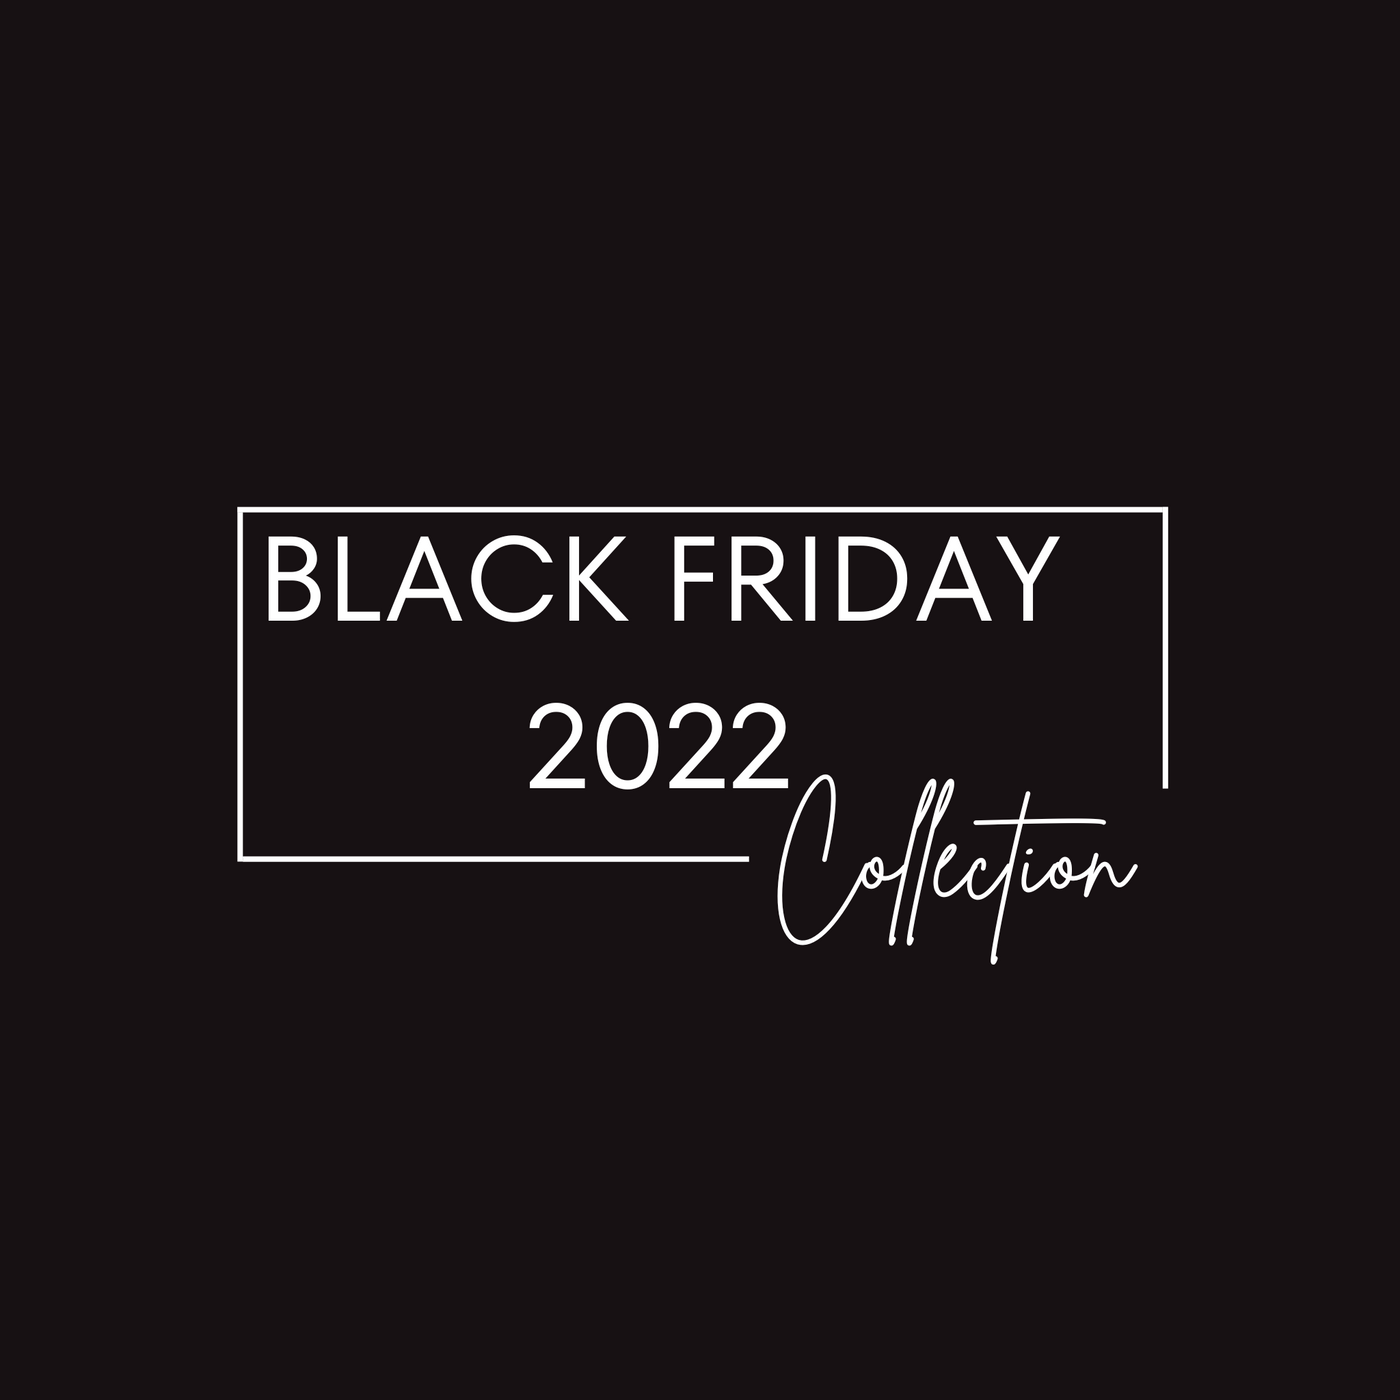 Black Friday 2022 Collection